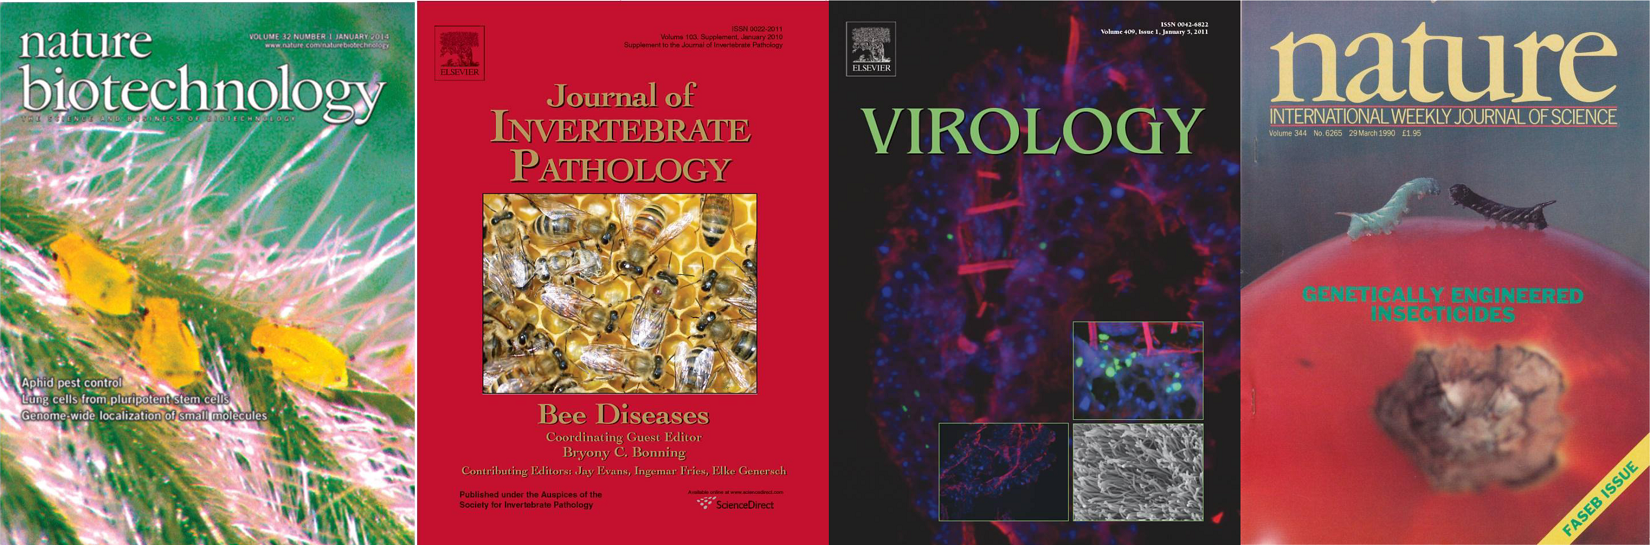 A montage of Four journal covers featuring images from Bonning lab research